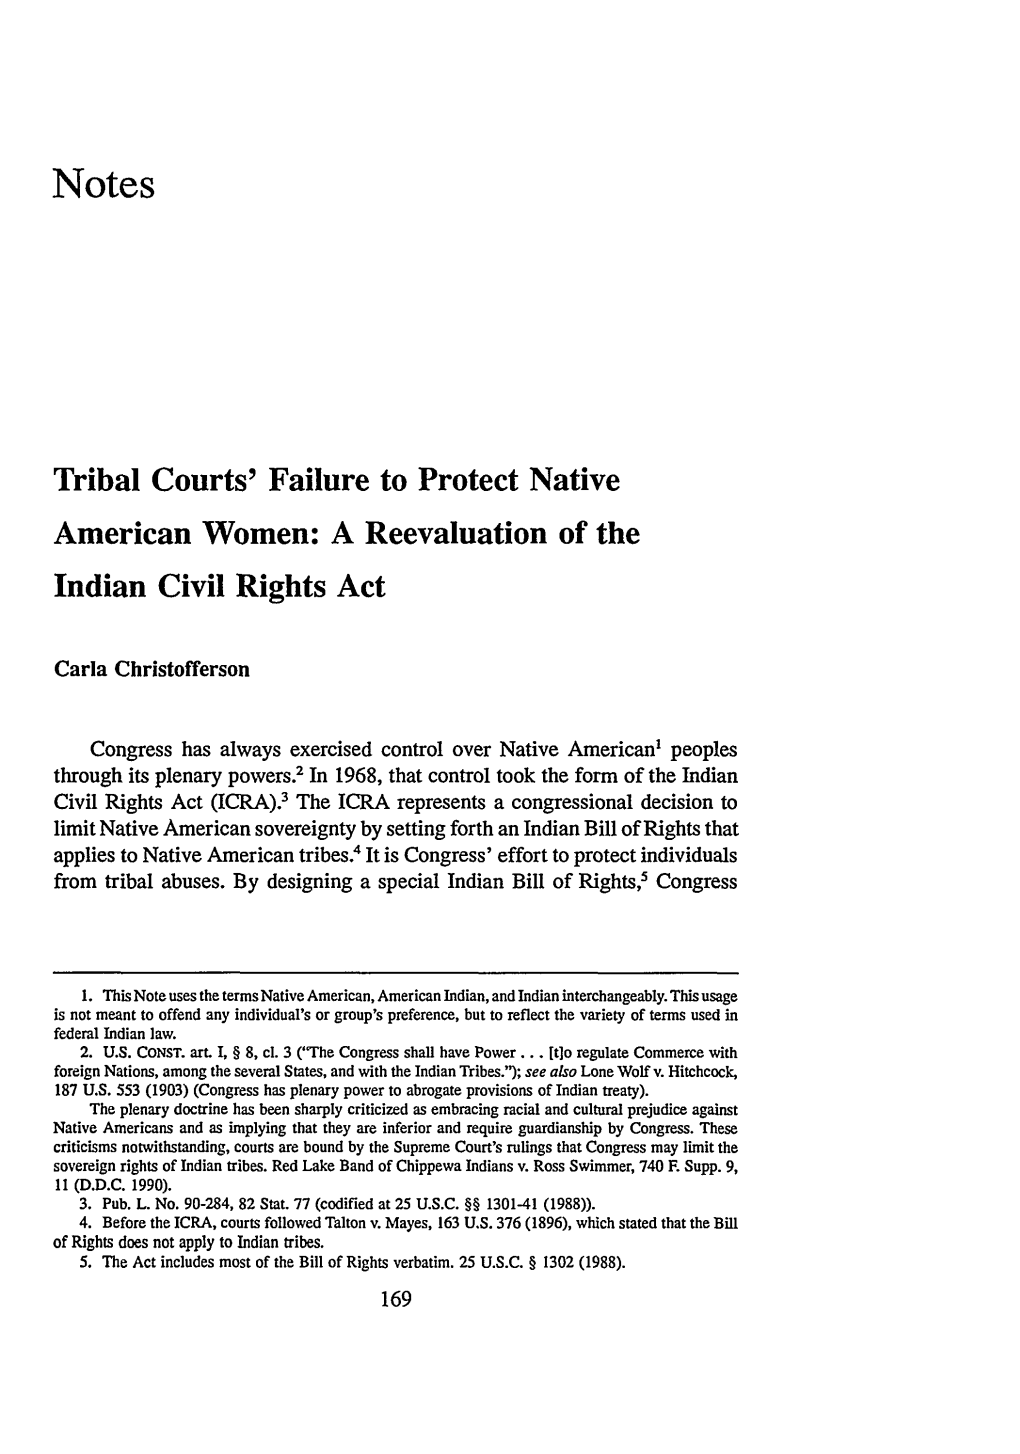 Tribal Courts' Failure to Protect Native American Women: a Reevaluation of the Indian Civil Rights Act